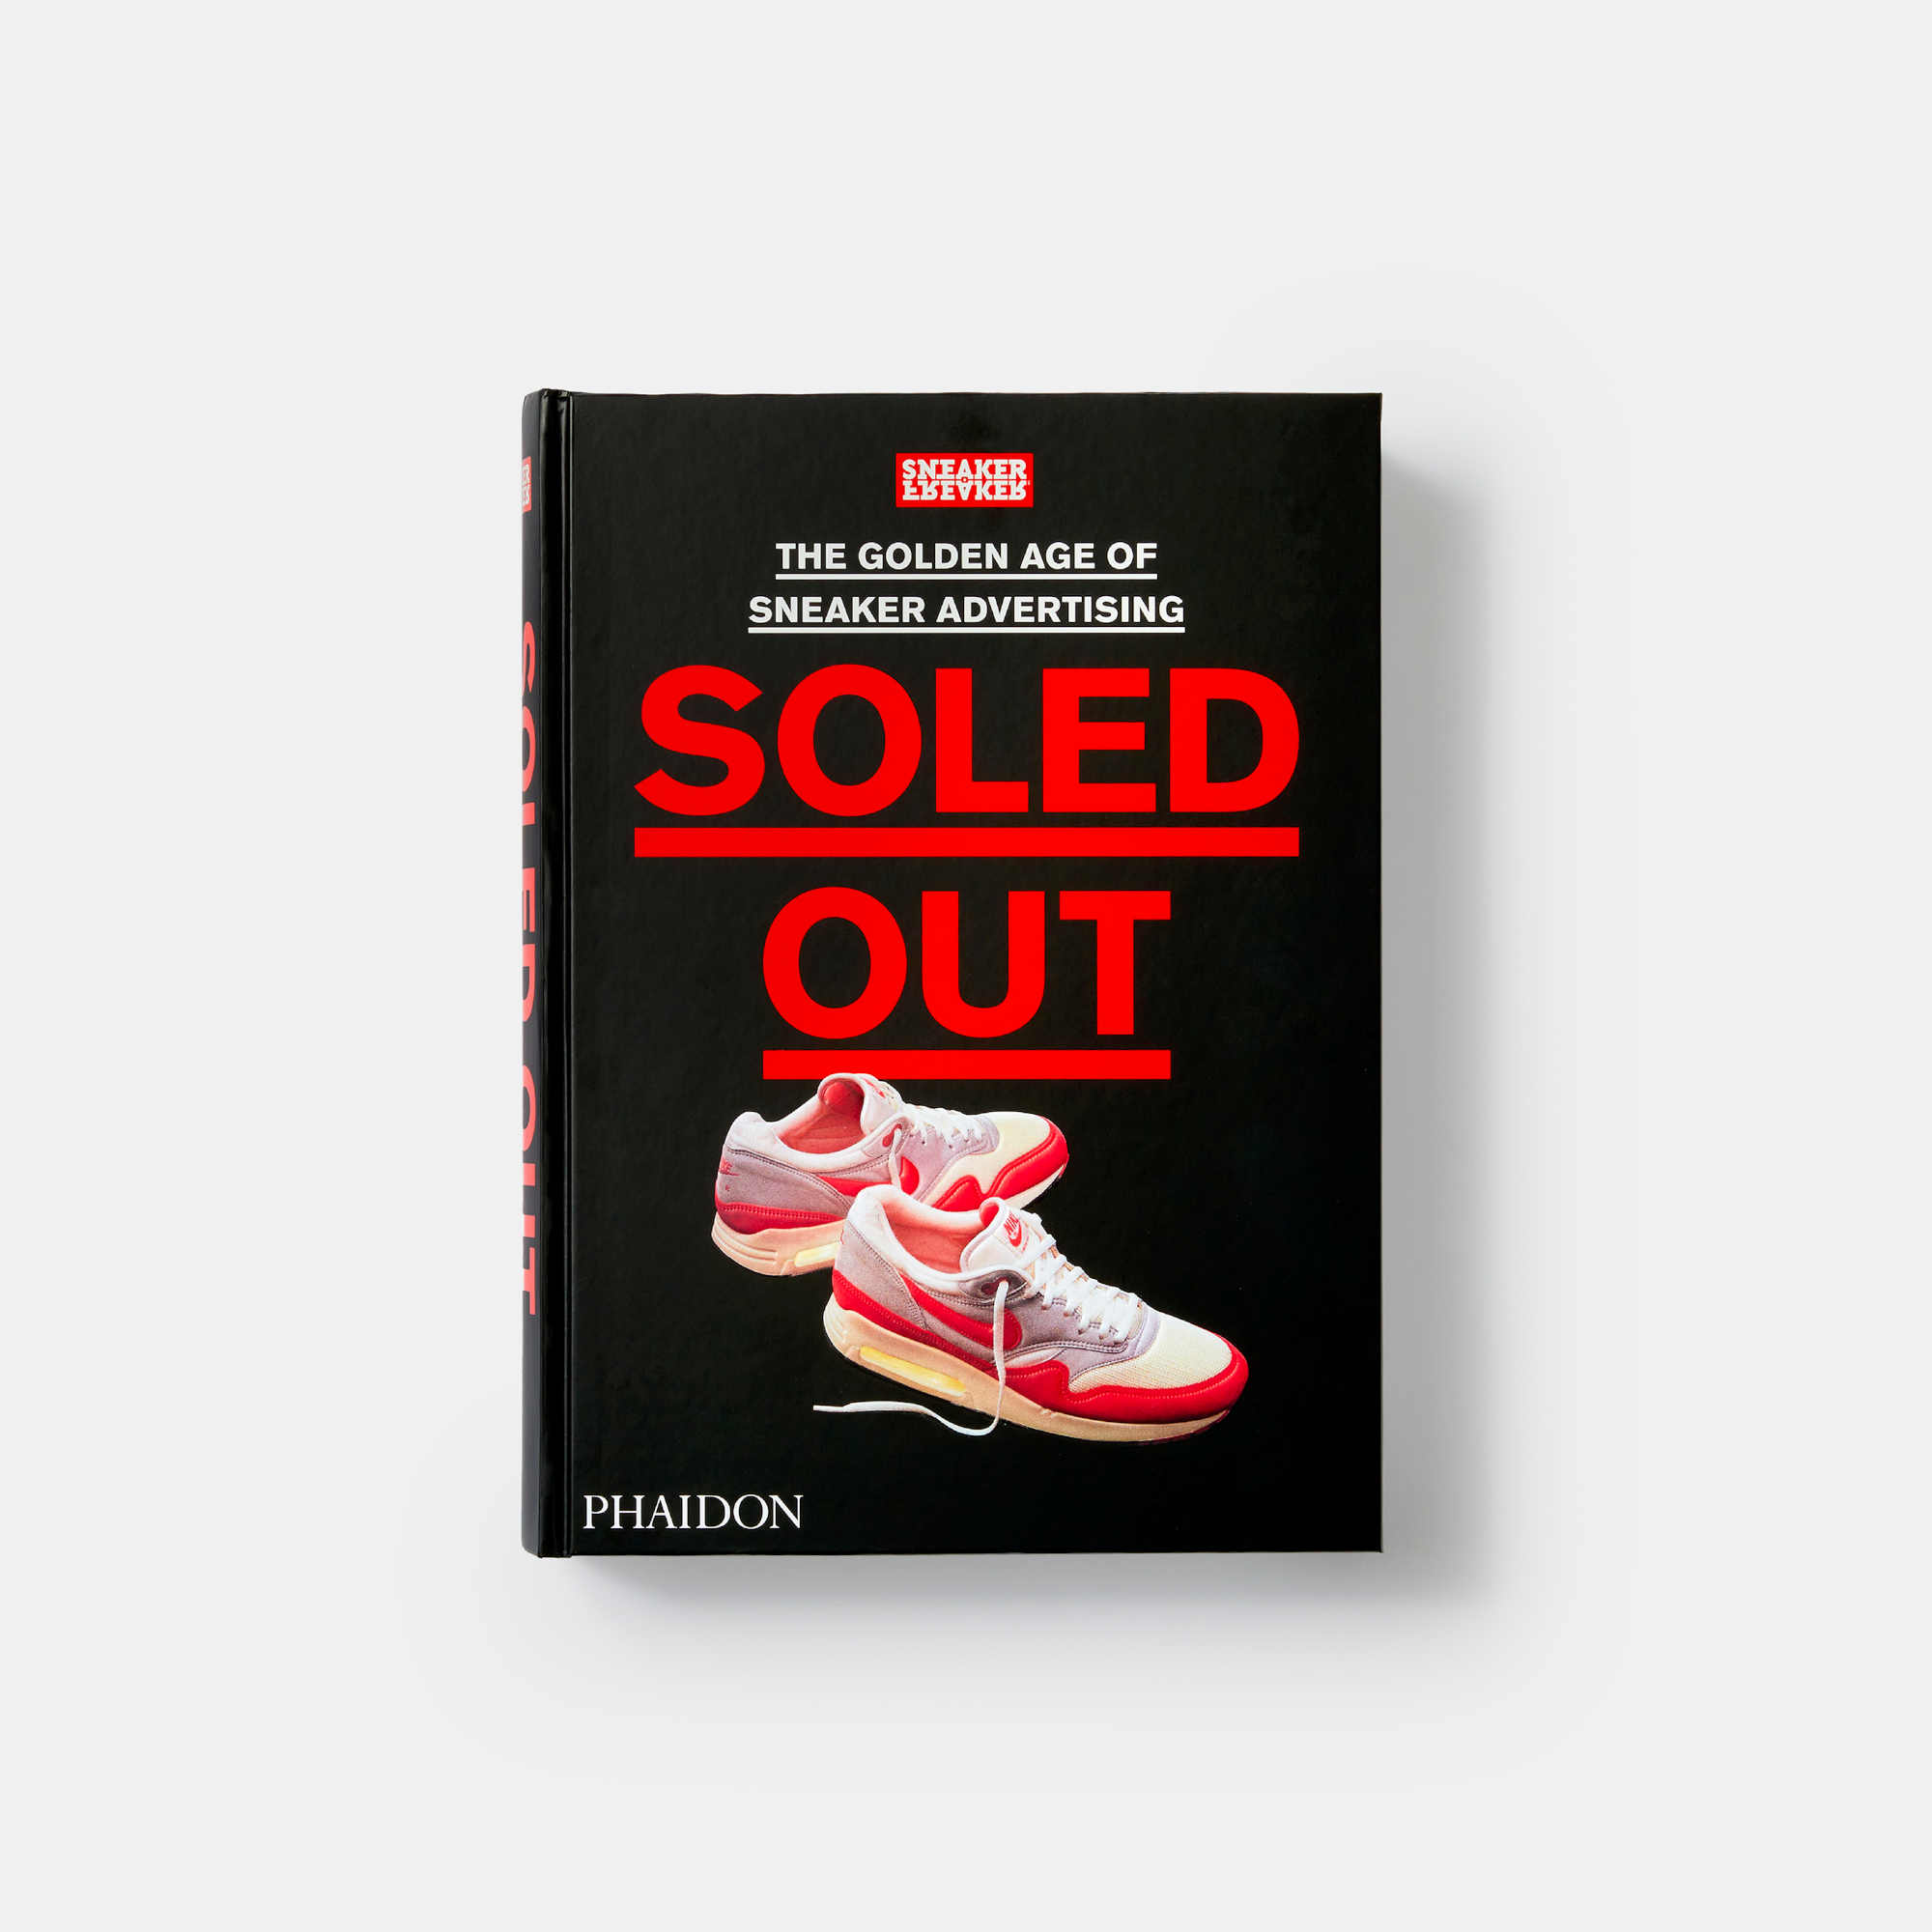 Woody of Sneaker Freaker magazine on how he turned his obsession for sneaker ads into Soled Out